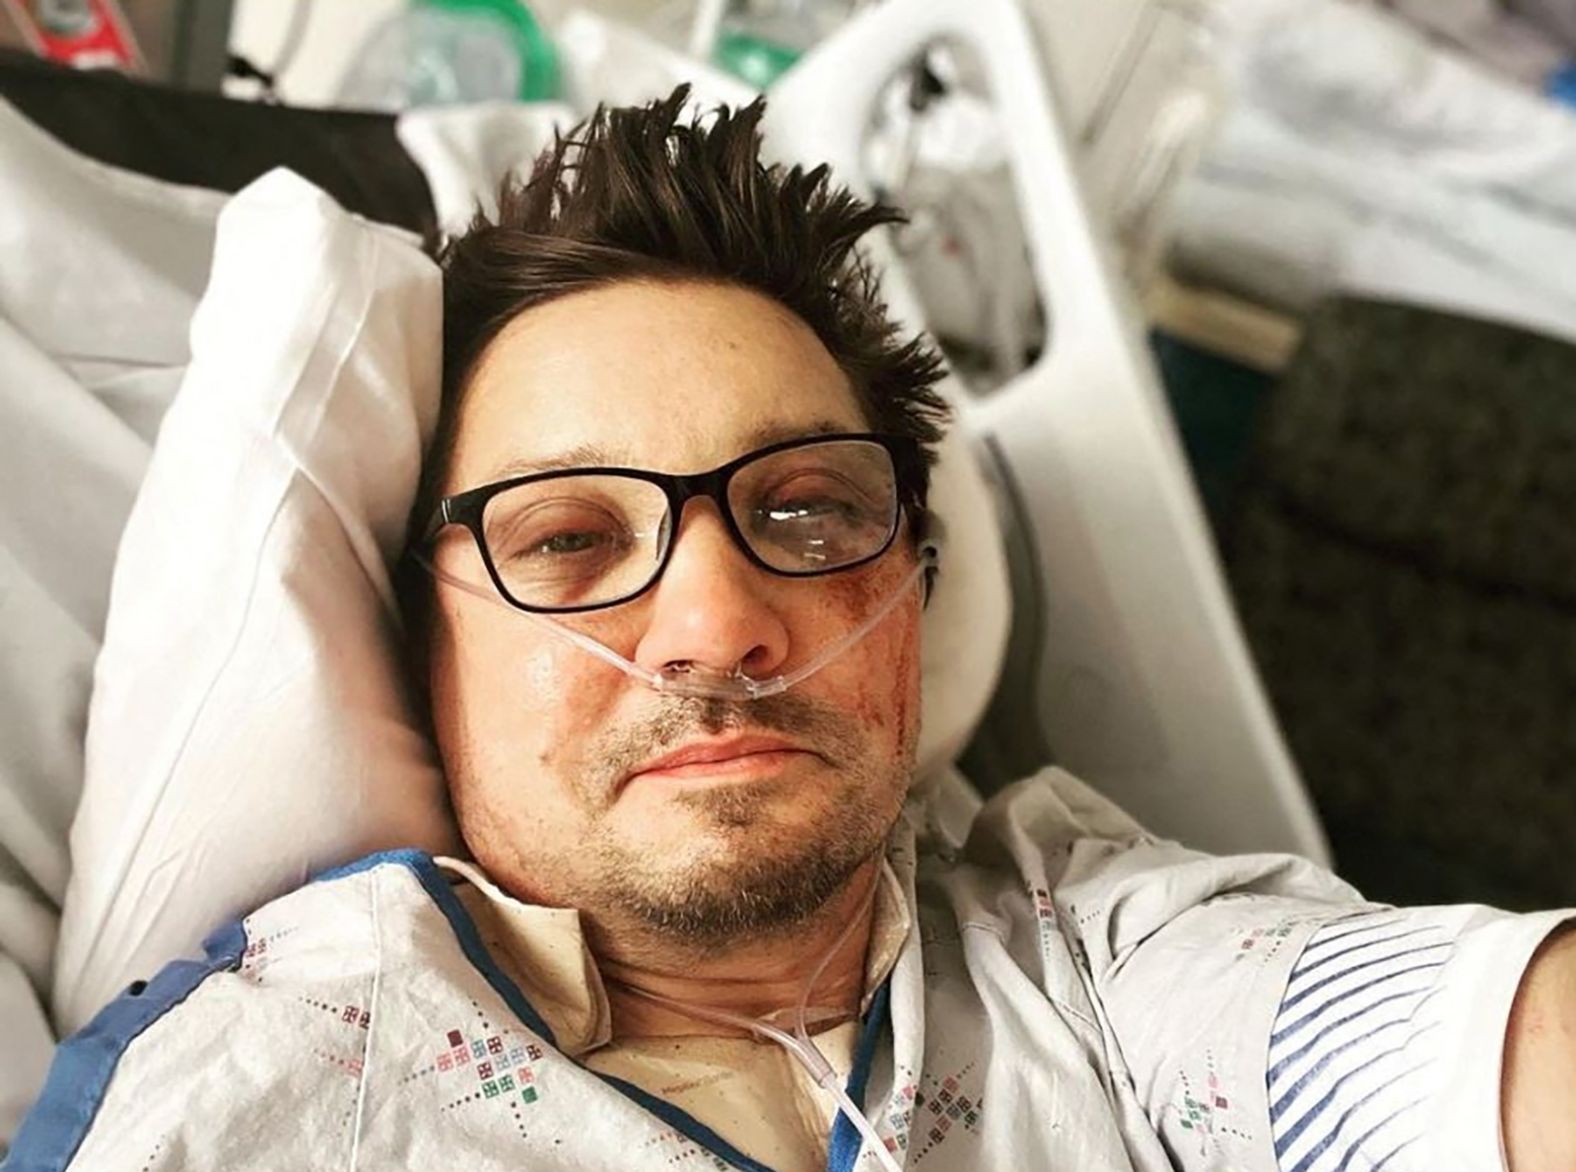 Actor Jeremy Renner posted <a href="https://www.instagram.com/p/Cm-KZ1YPJe7/?hl=en" target="_blank" target="_blank">this selfie</a> to his Instagram account on Tuesday, January 3, <a href="https://www.cnn.com/2023/01/04/entertainment/jeremy-renner-snow-plow-hospital-wednesday/index.html" target="_blank">thanking fans</a> as he continued to recover from two surgeries. Renner was injured by a snowplow machine in what officials described as a tragic accident. "Thank you all for your kind words. Im too messed up now to type. But I send love to you all," Renner wrote.